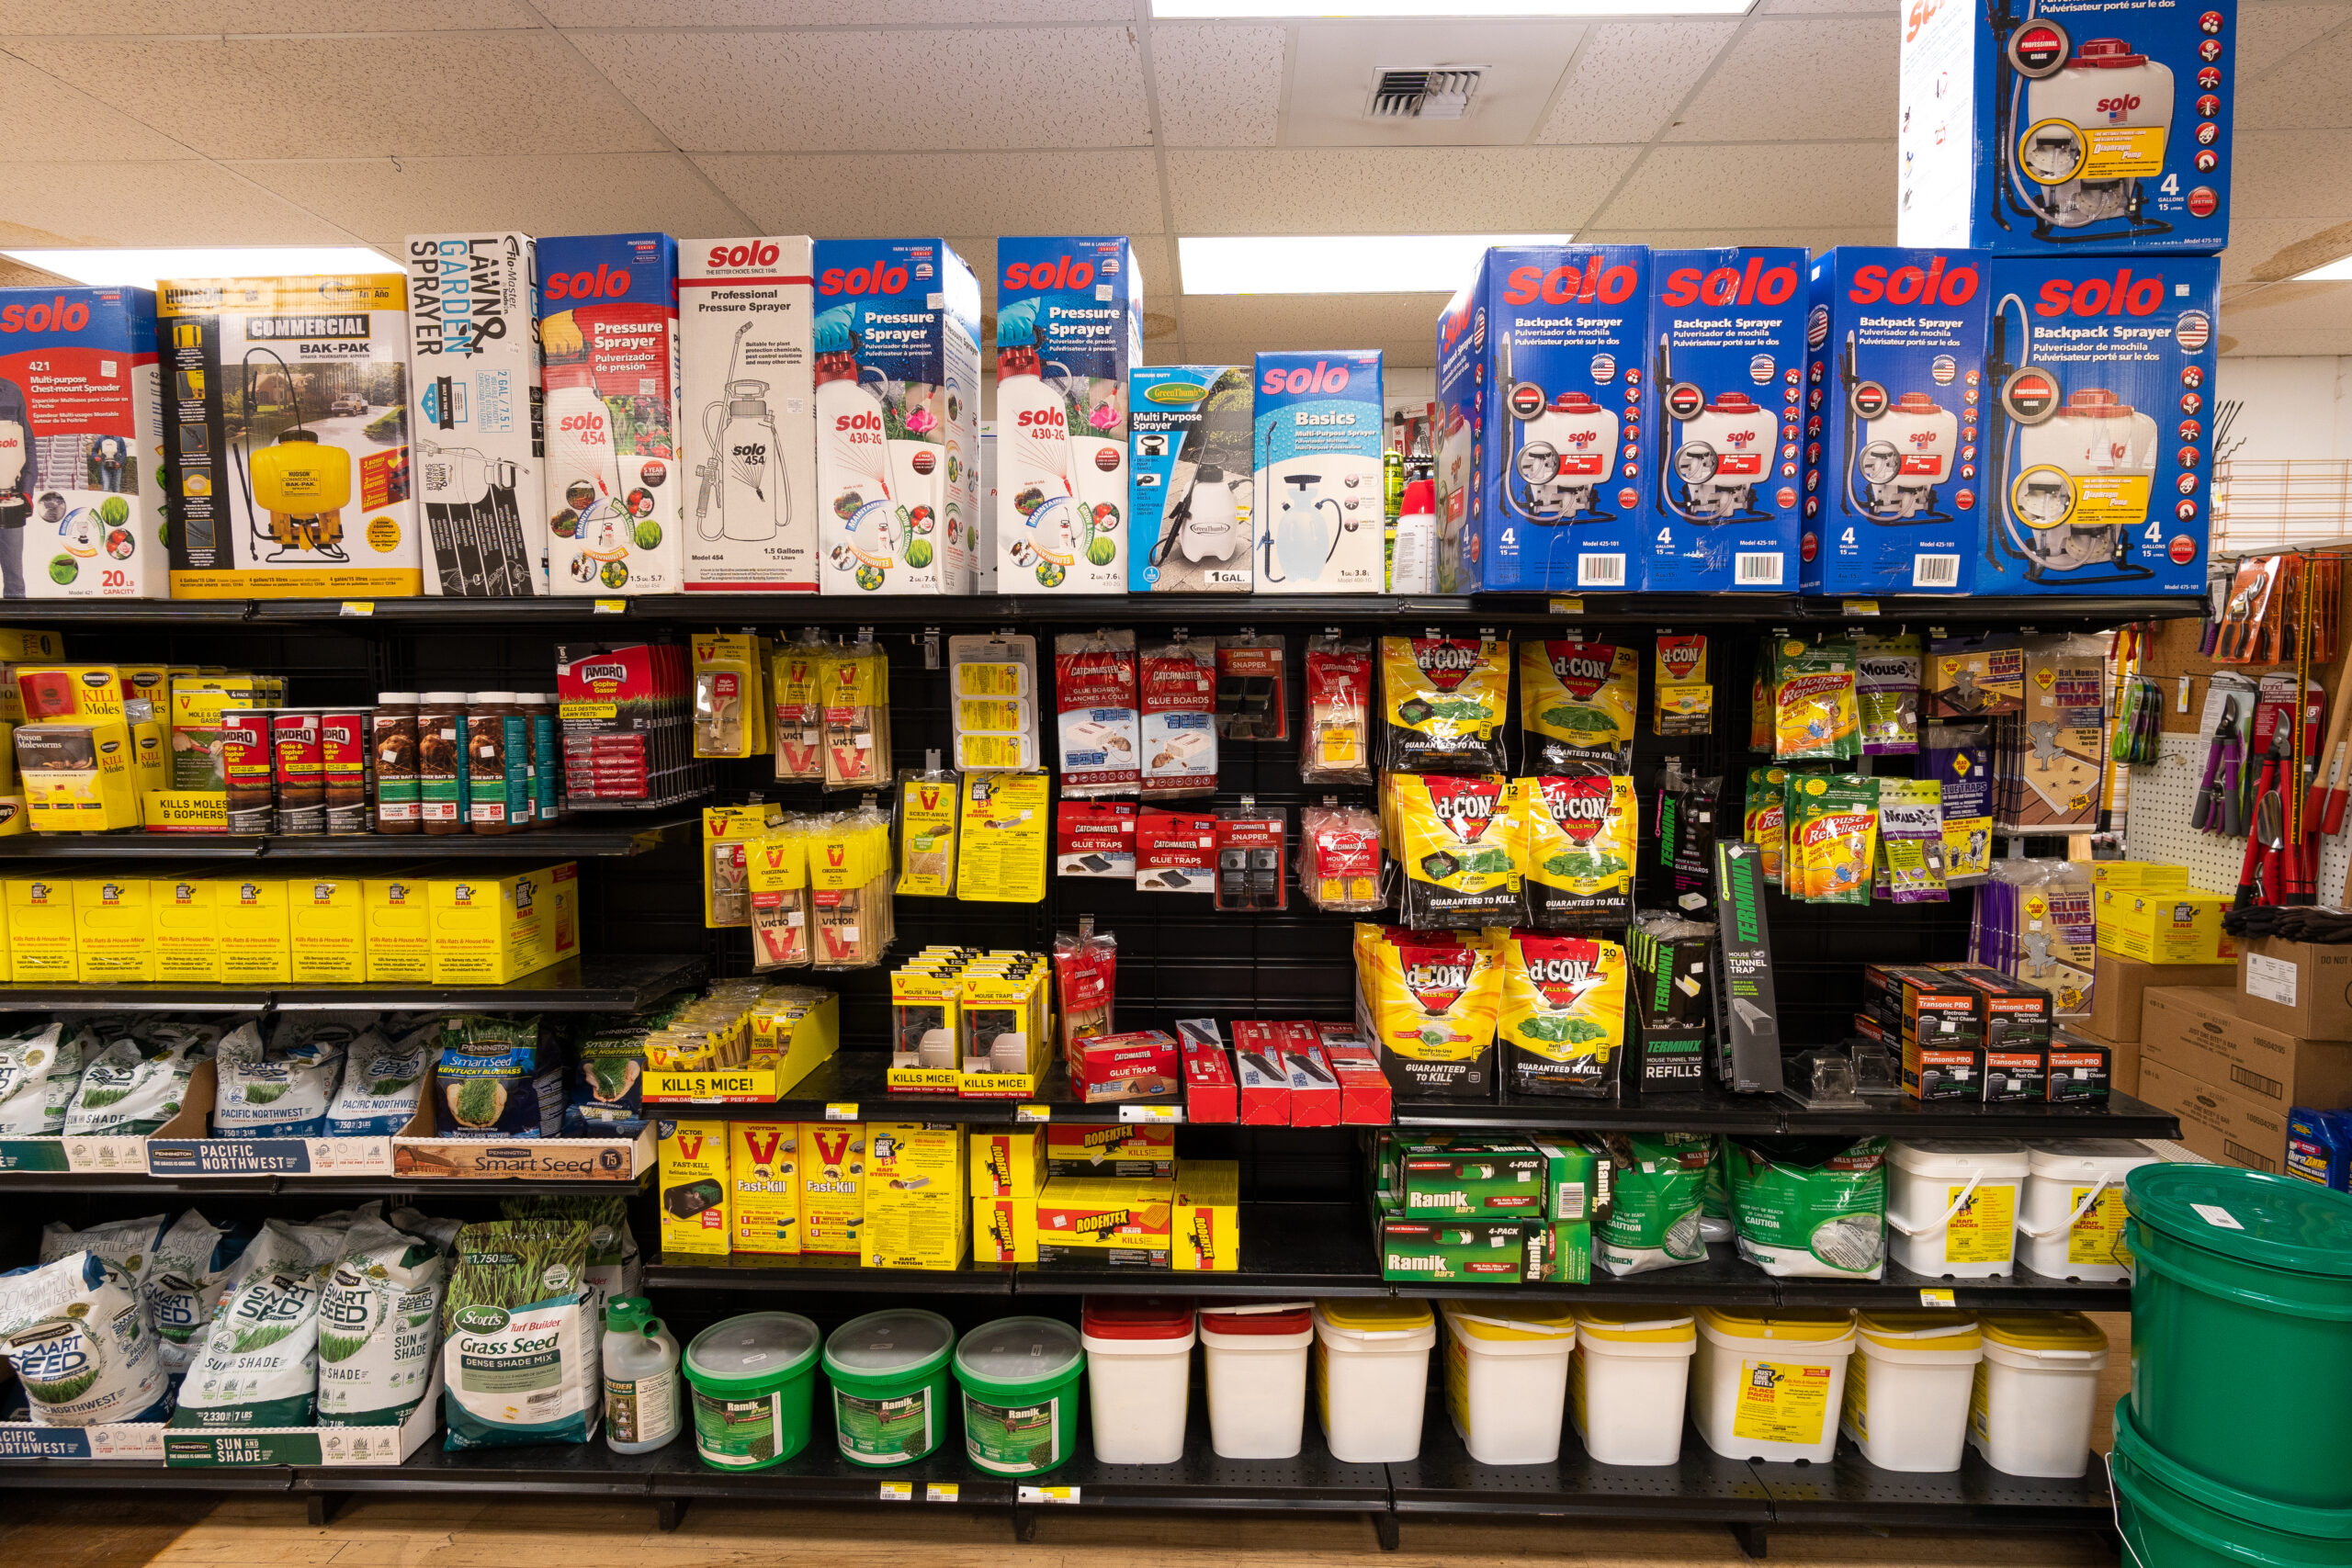 A shelf full of gardening supplies & pest control products